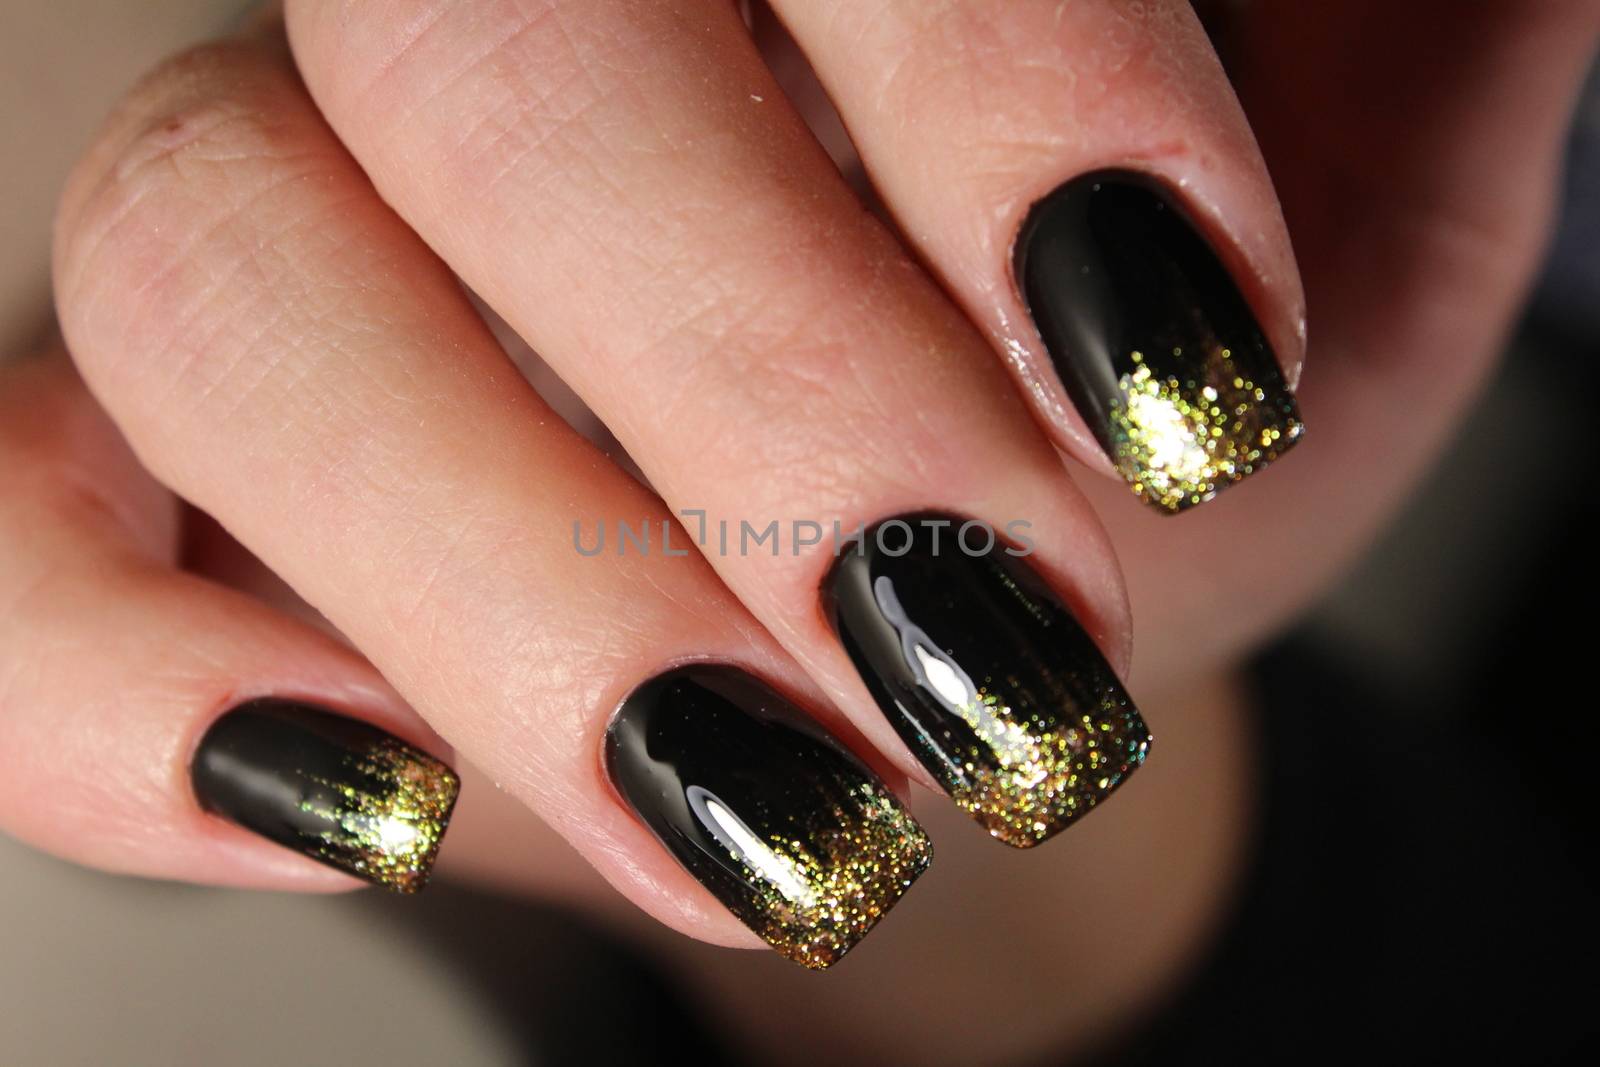 Evening manicure design in black and gold color by SmirMaxStock